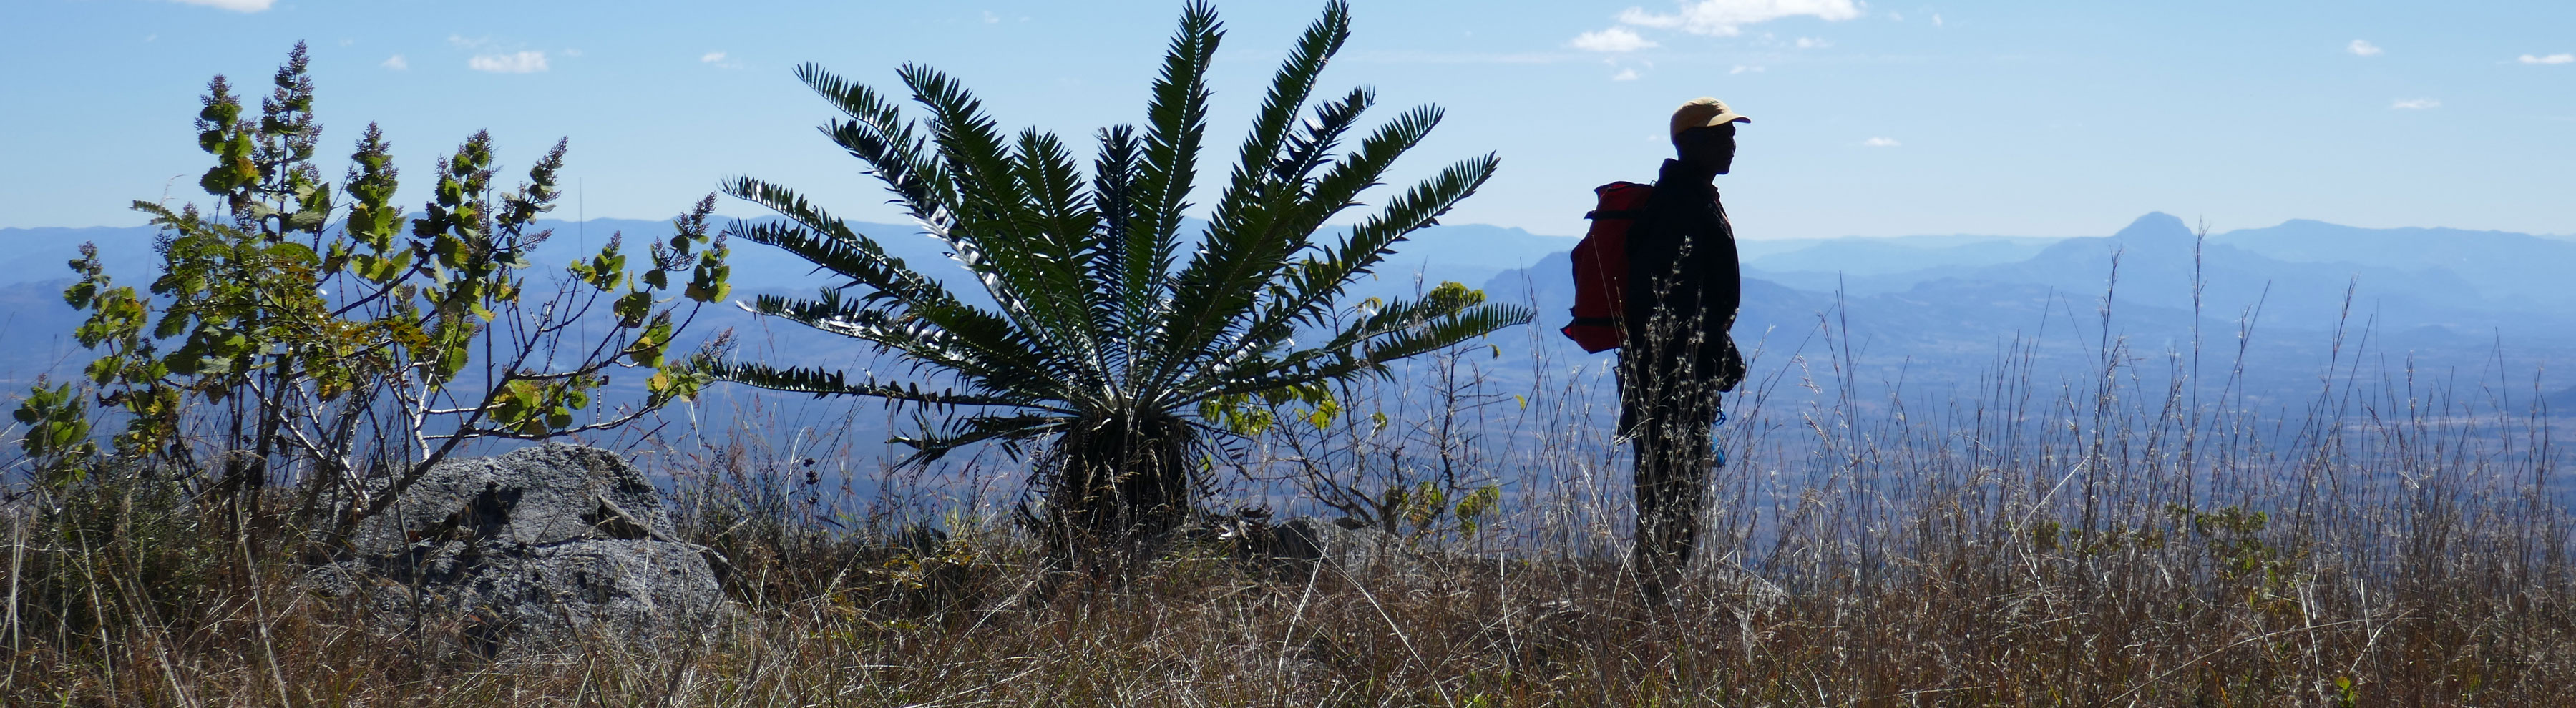 Man stood on a mountain next to large cycad